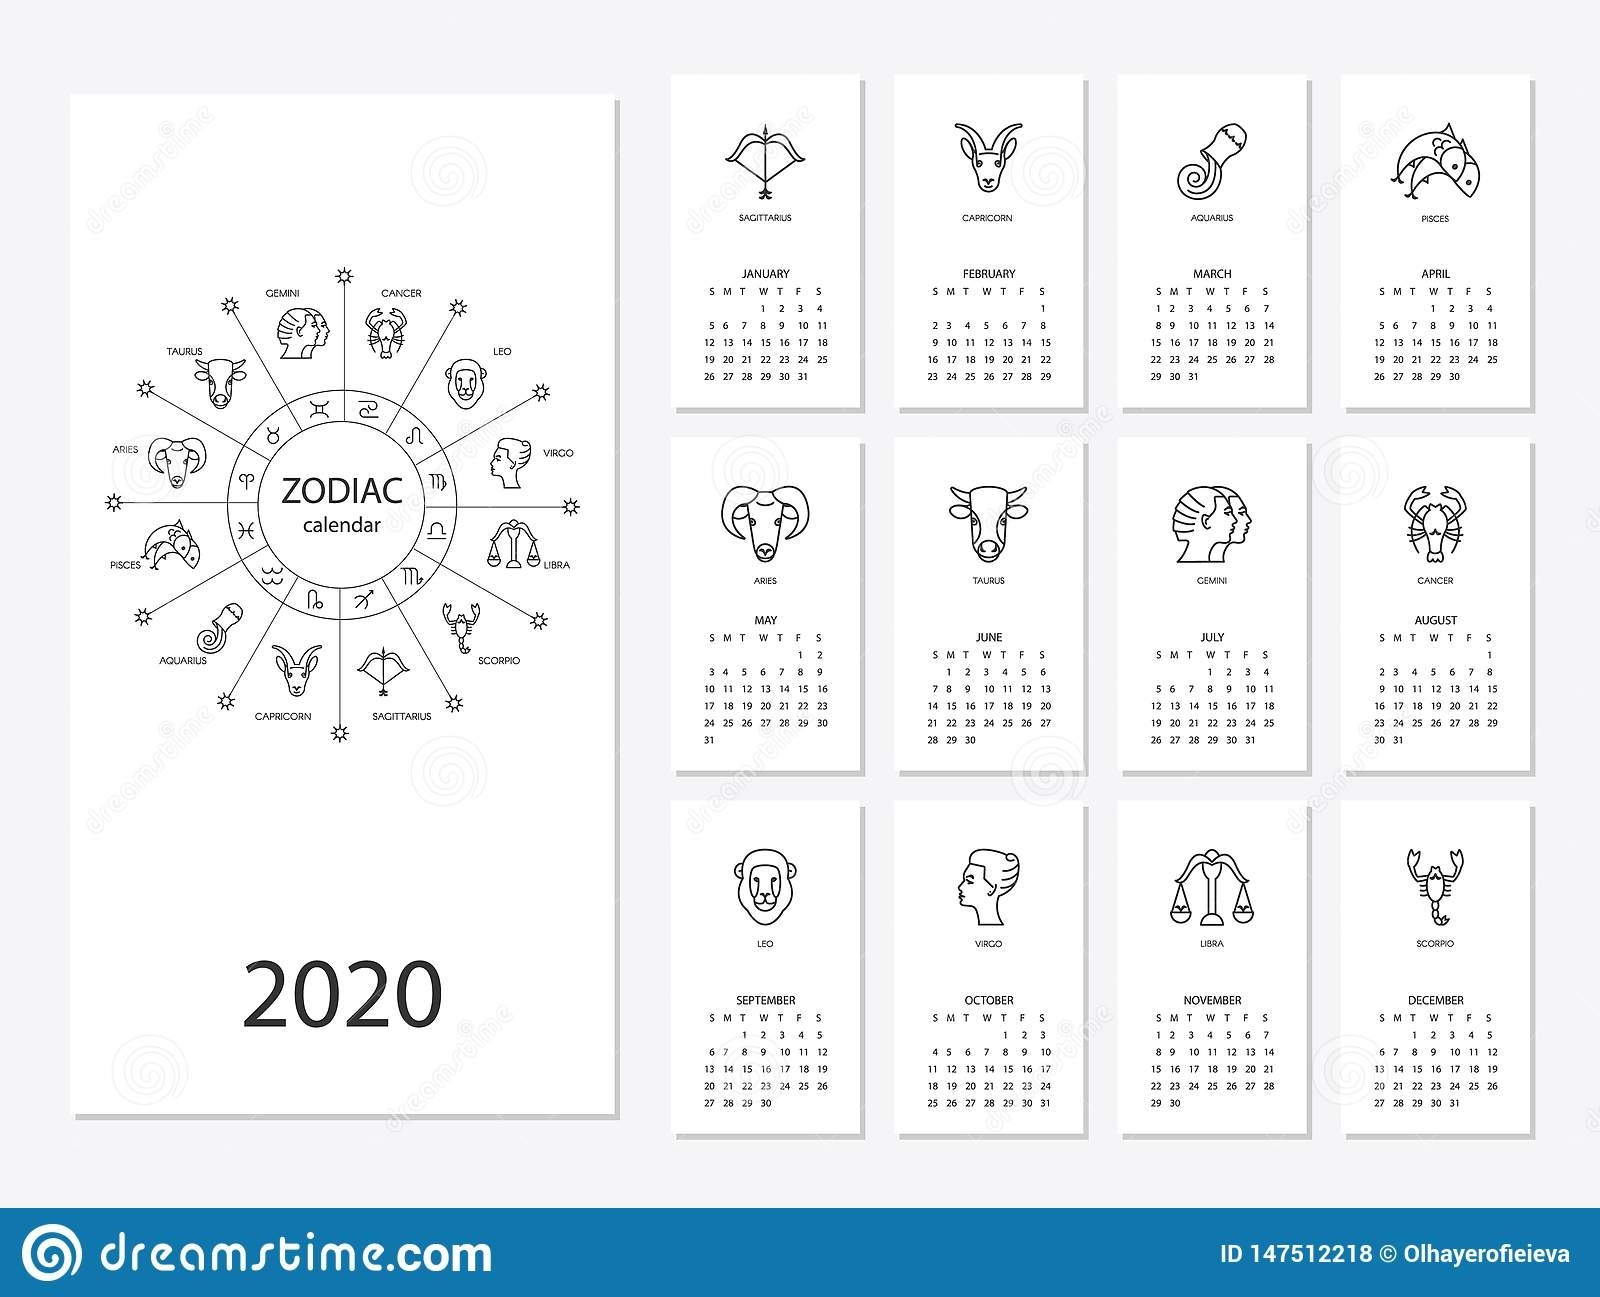 zodiac sign dates and months 2020